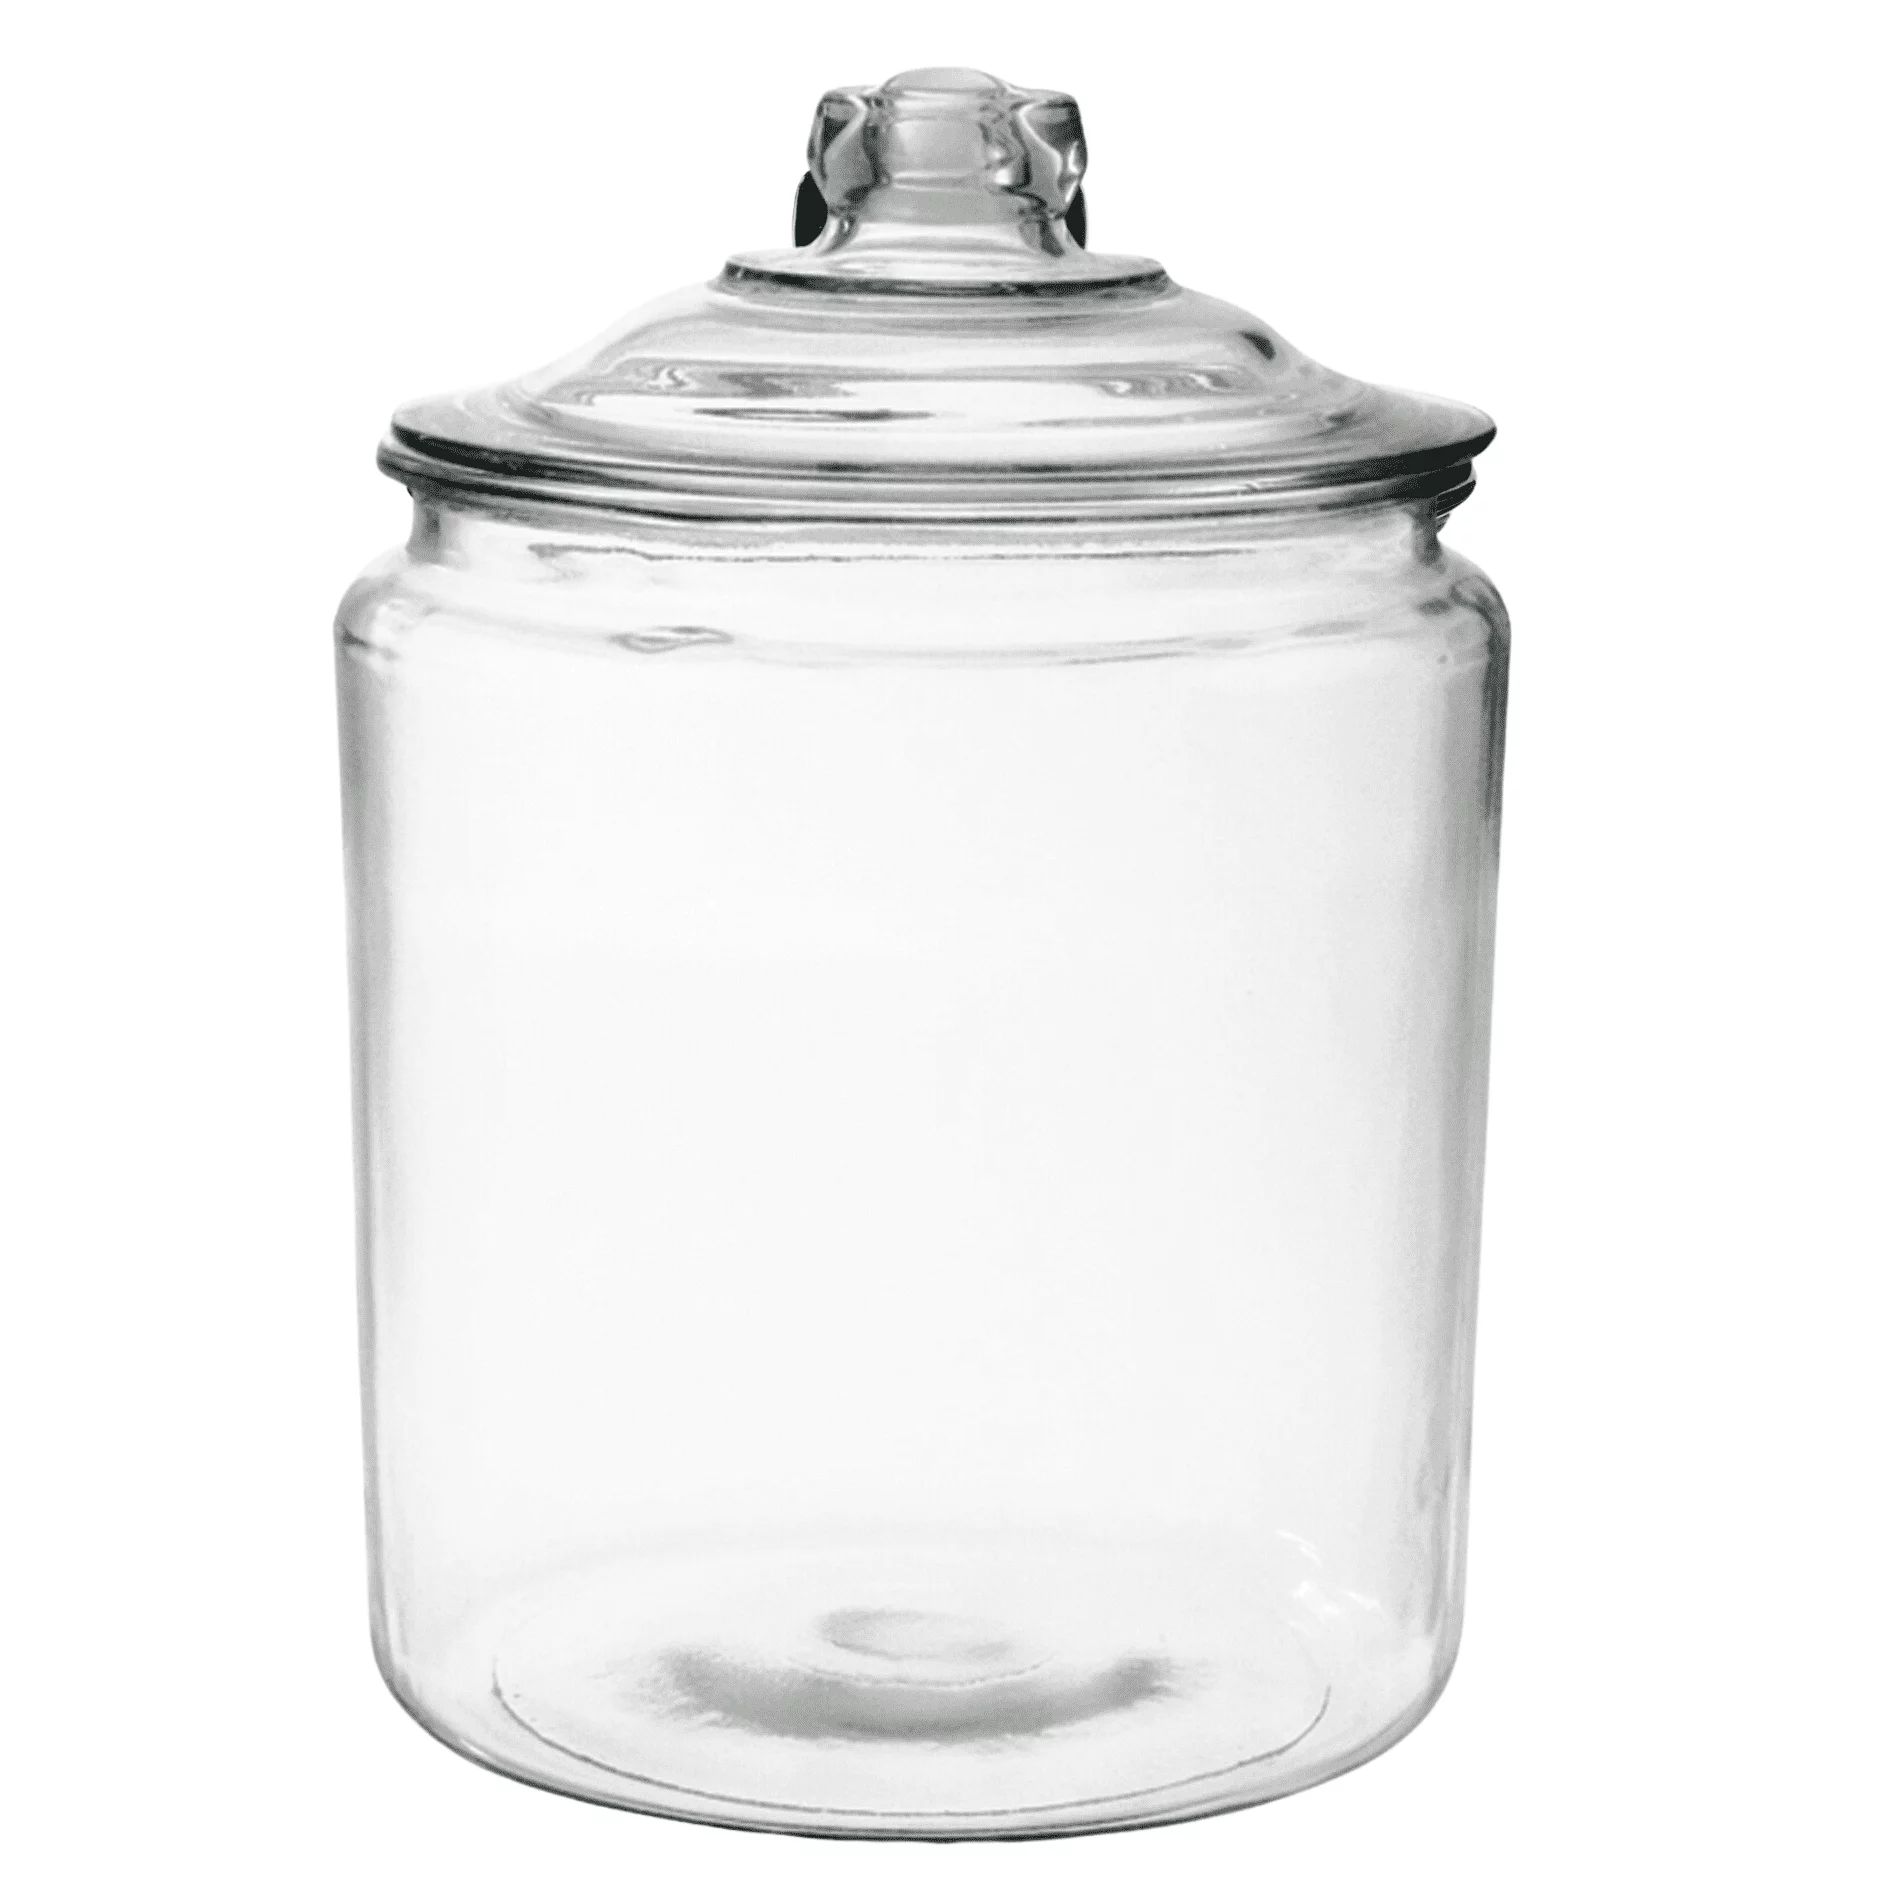 Anchor Hocking Heritage Hill Glass Jar with Lid, 2 Gallon | Walmart (US)